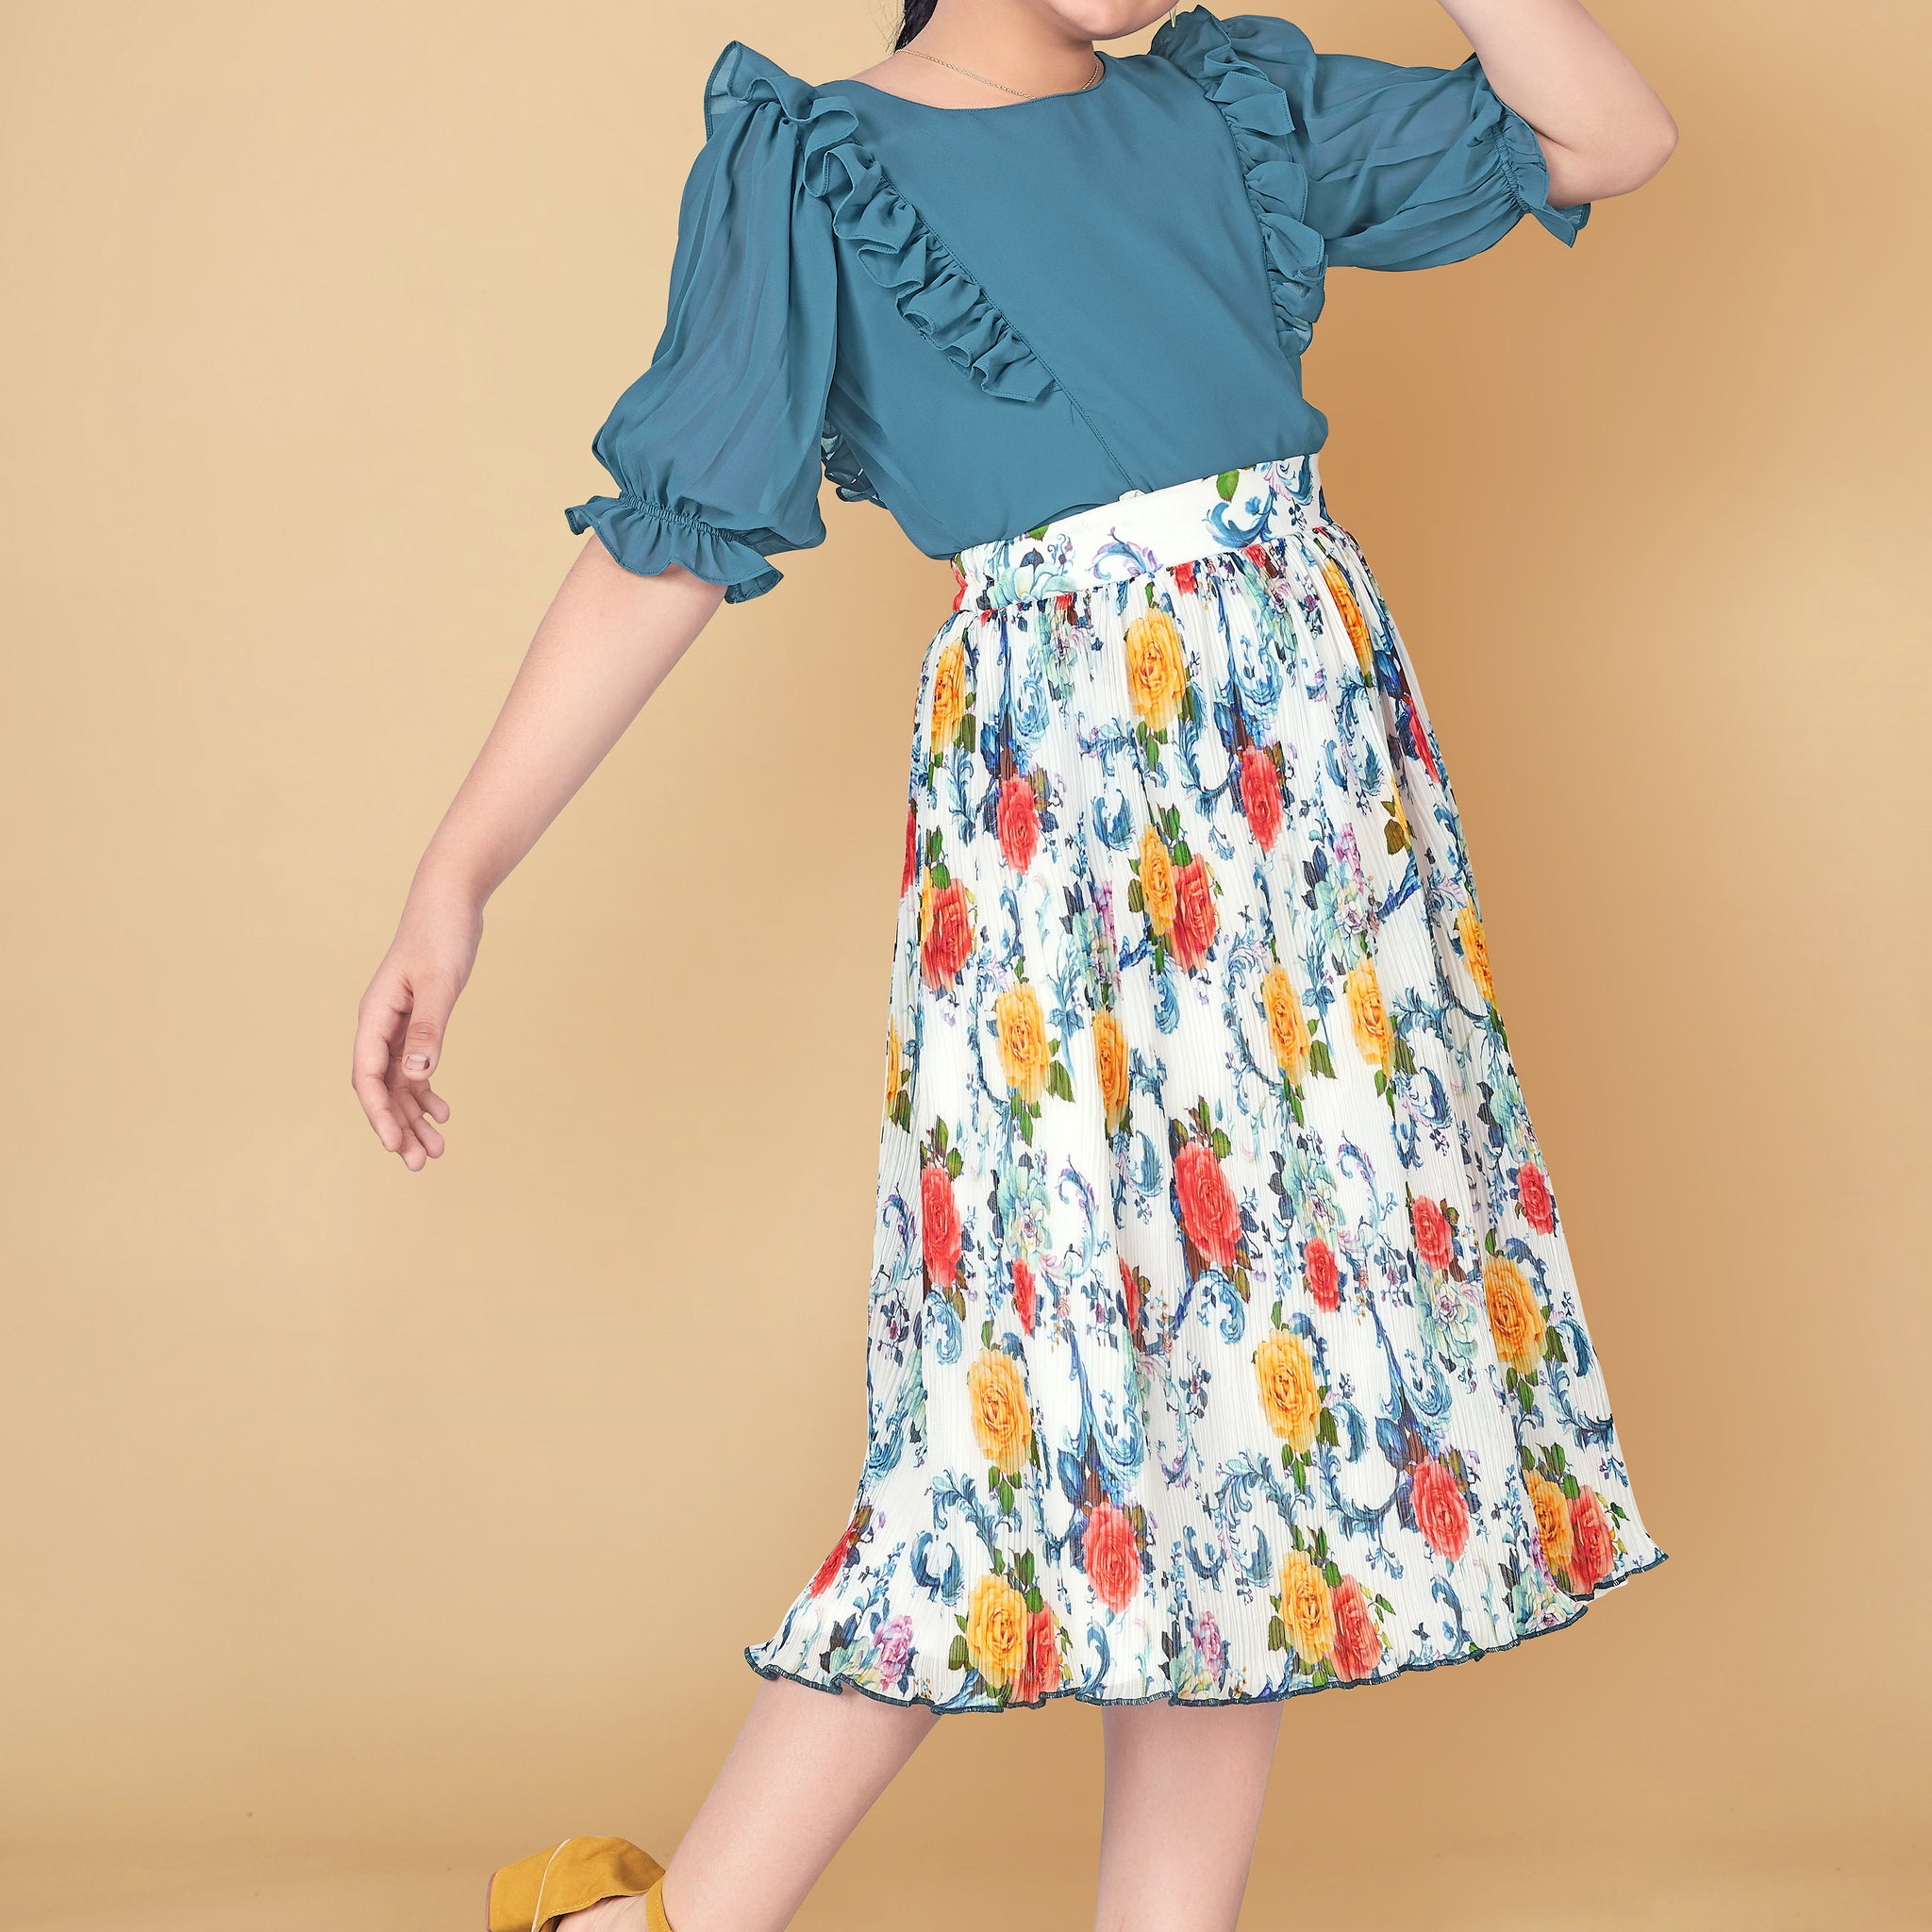 Girl’s Teal Blue Georgette Top with Accordion Pleated Skirt Clothing Set